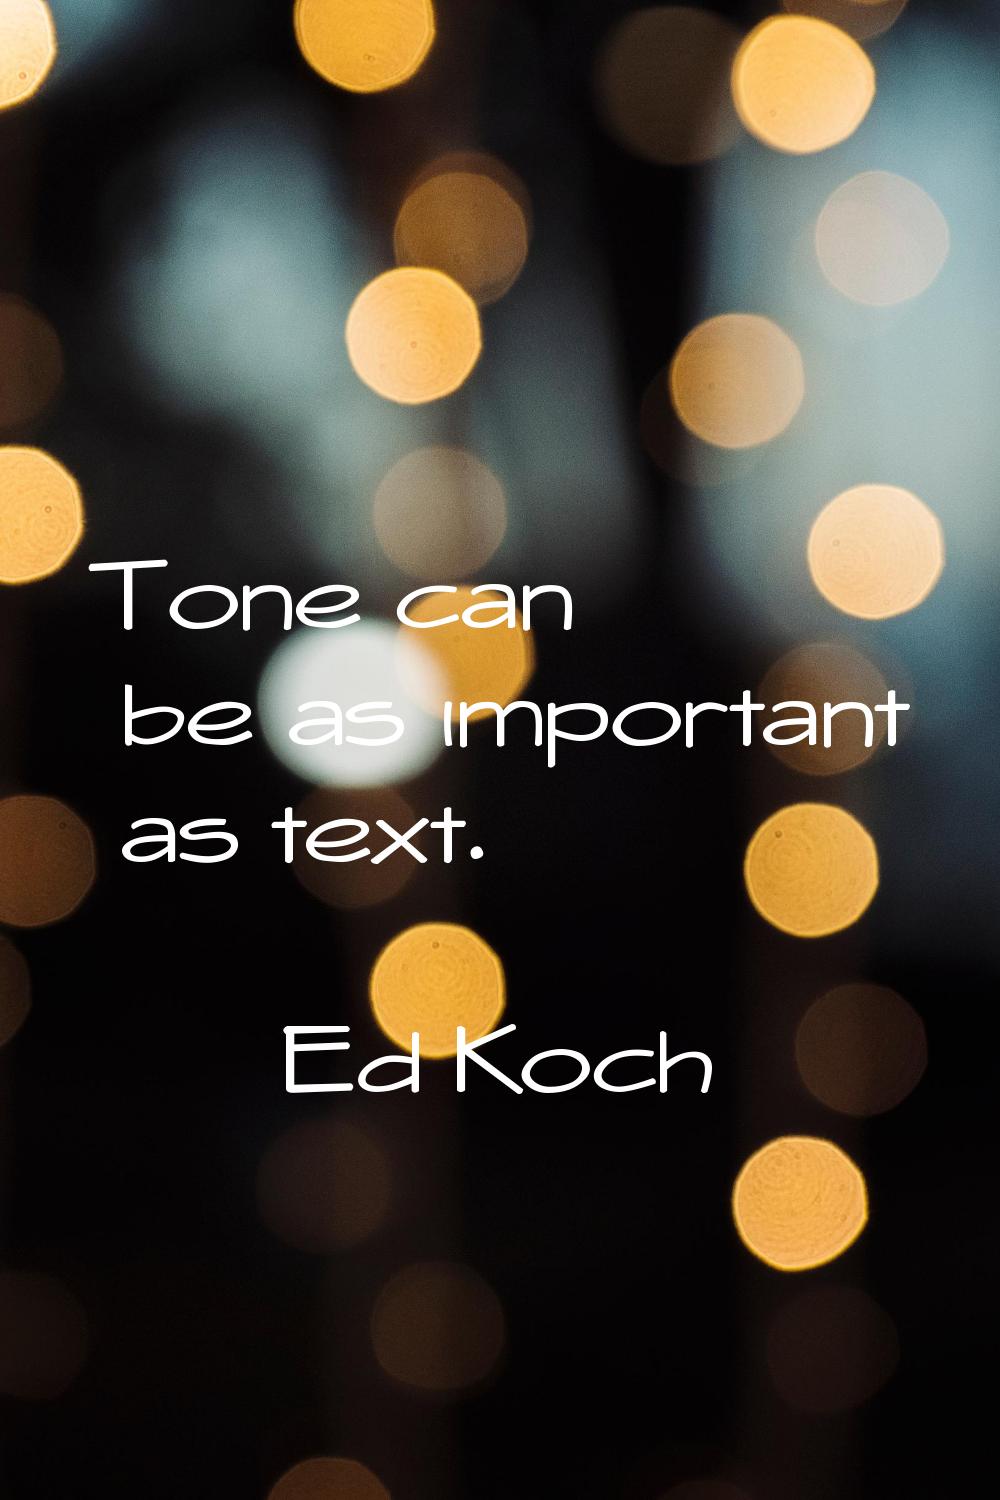 Tone can be as important as text.